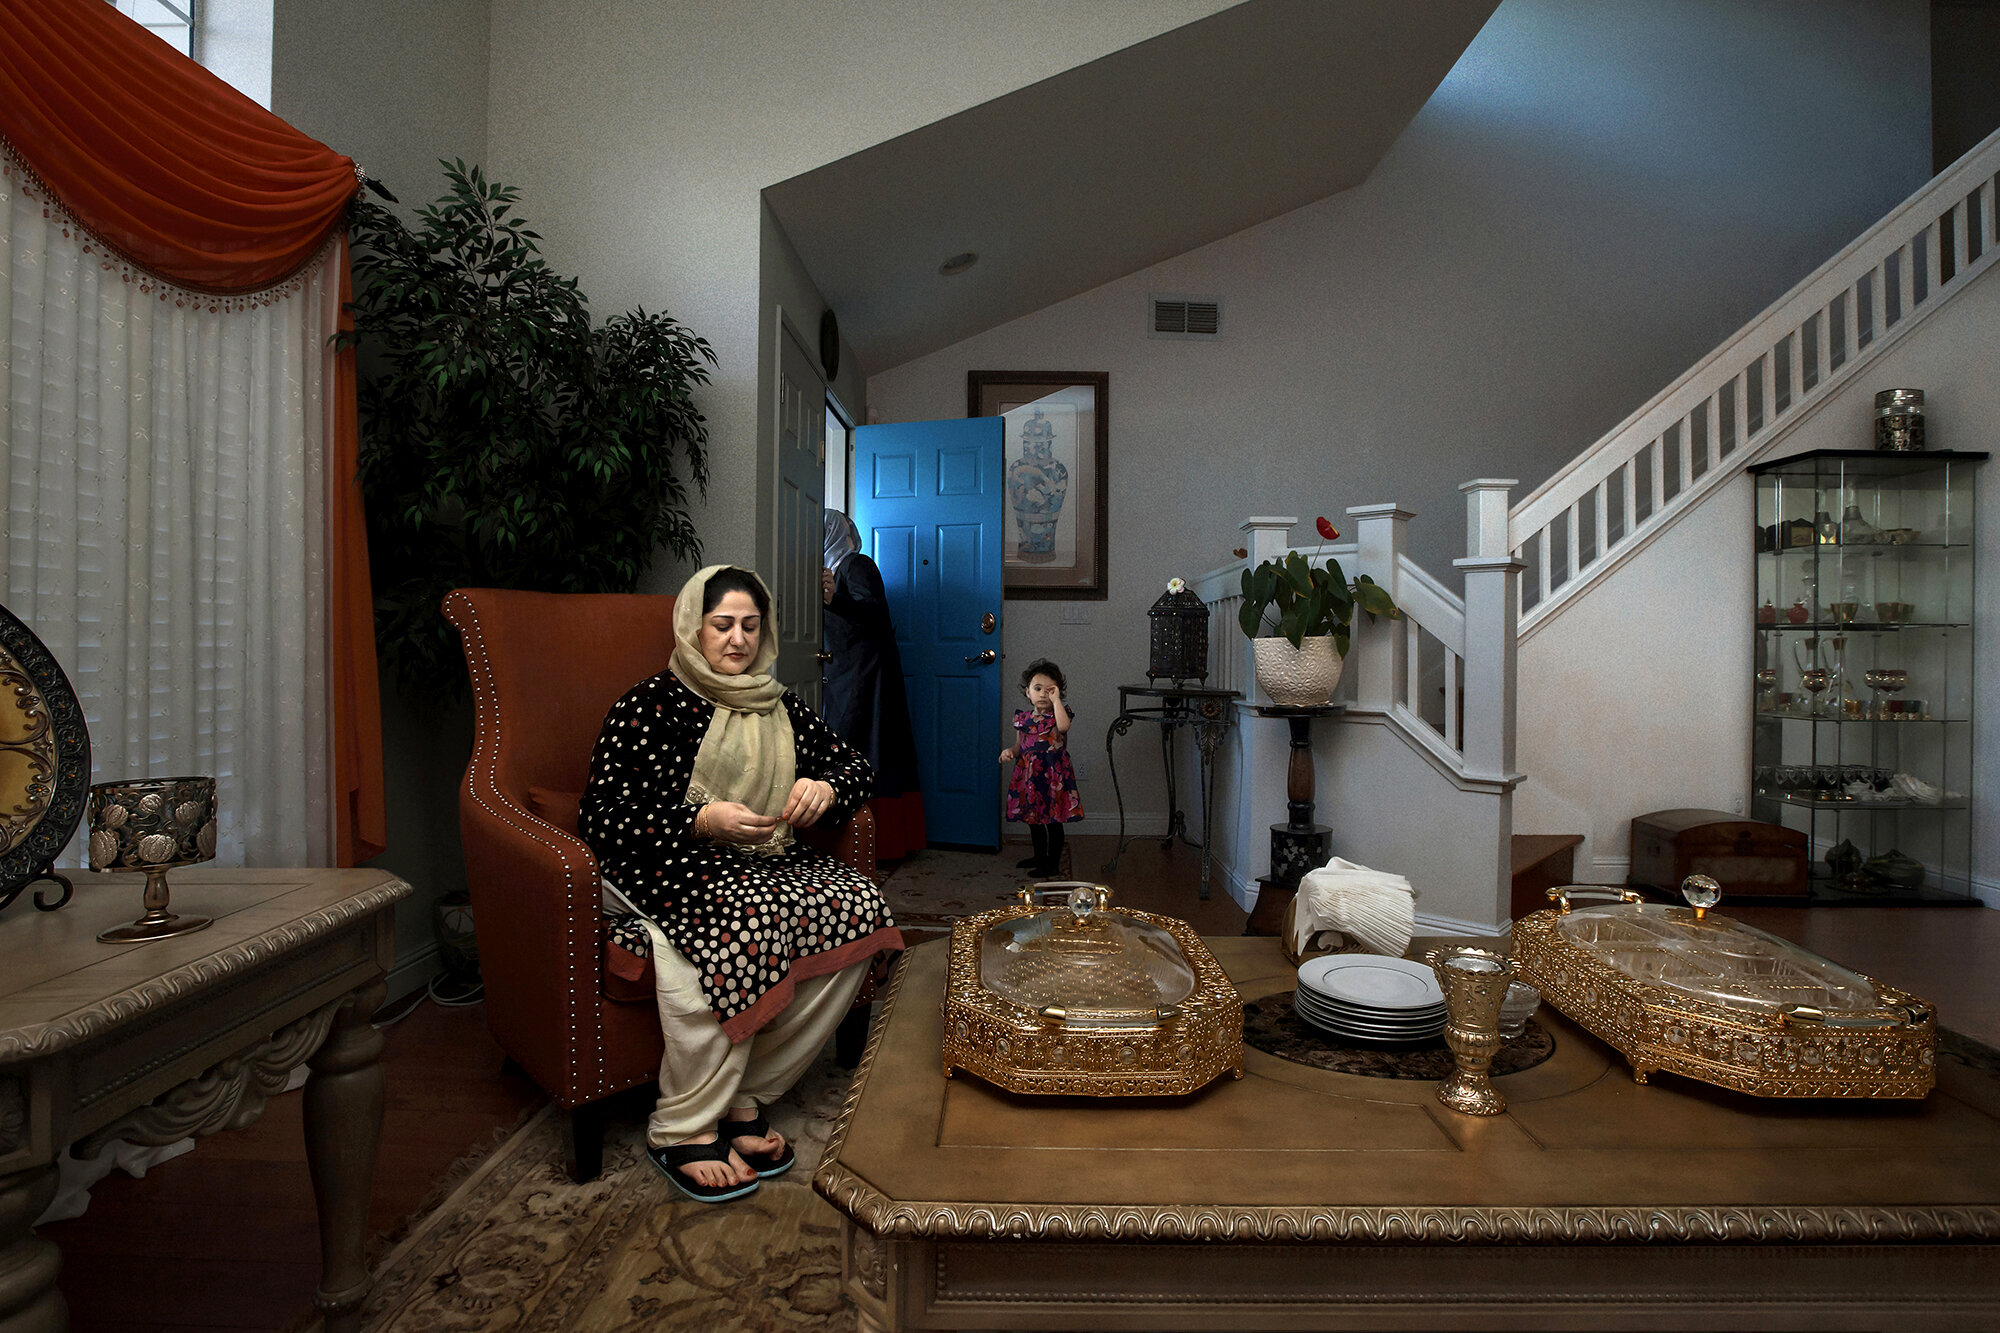   USA. Fremont, California. April, 2018. Three-year-old, Dua Safi (right) at her grandmother's home.        